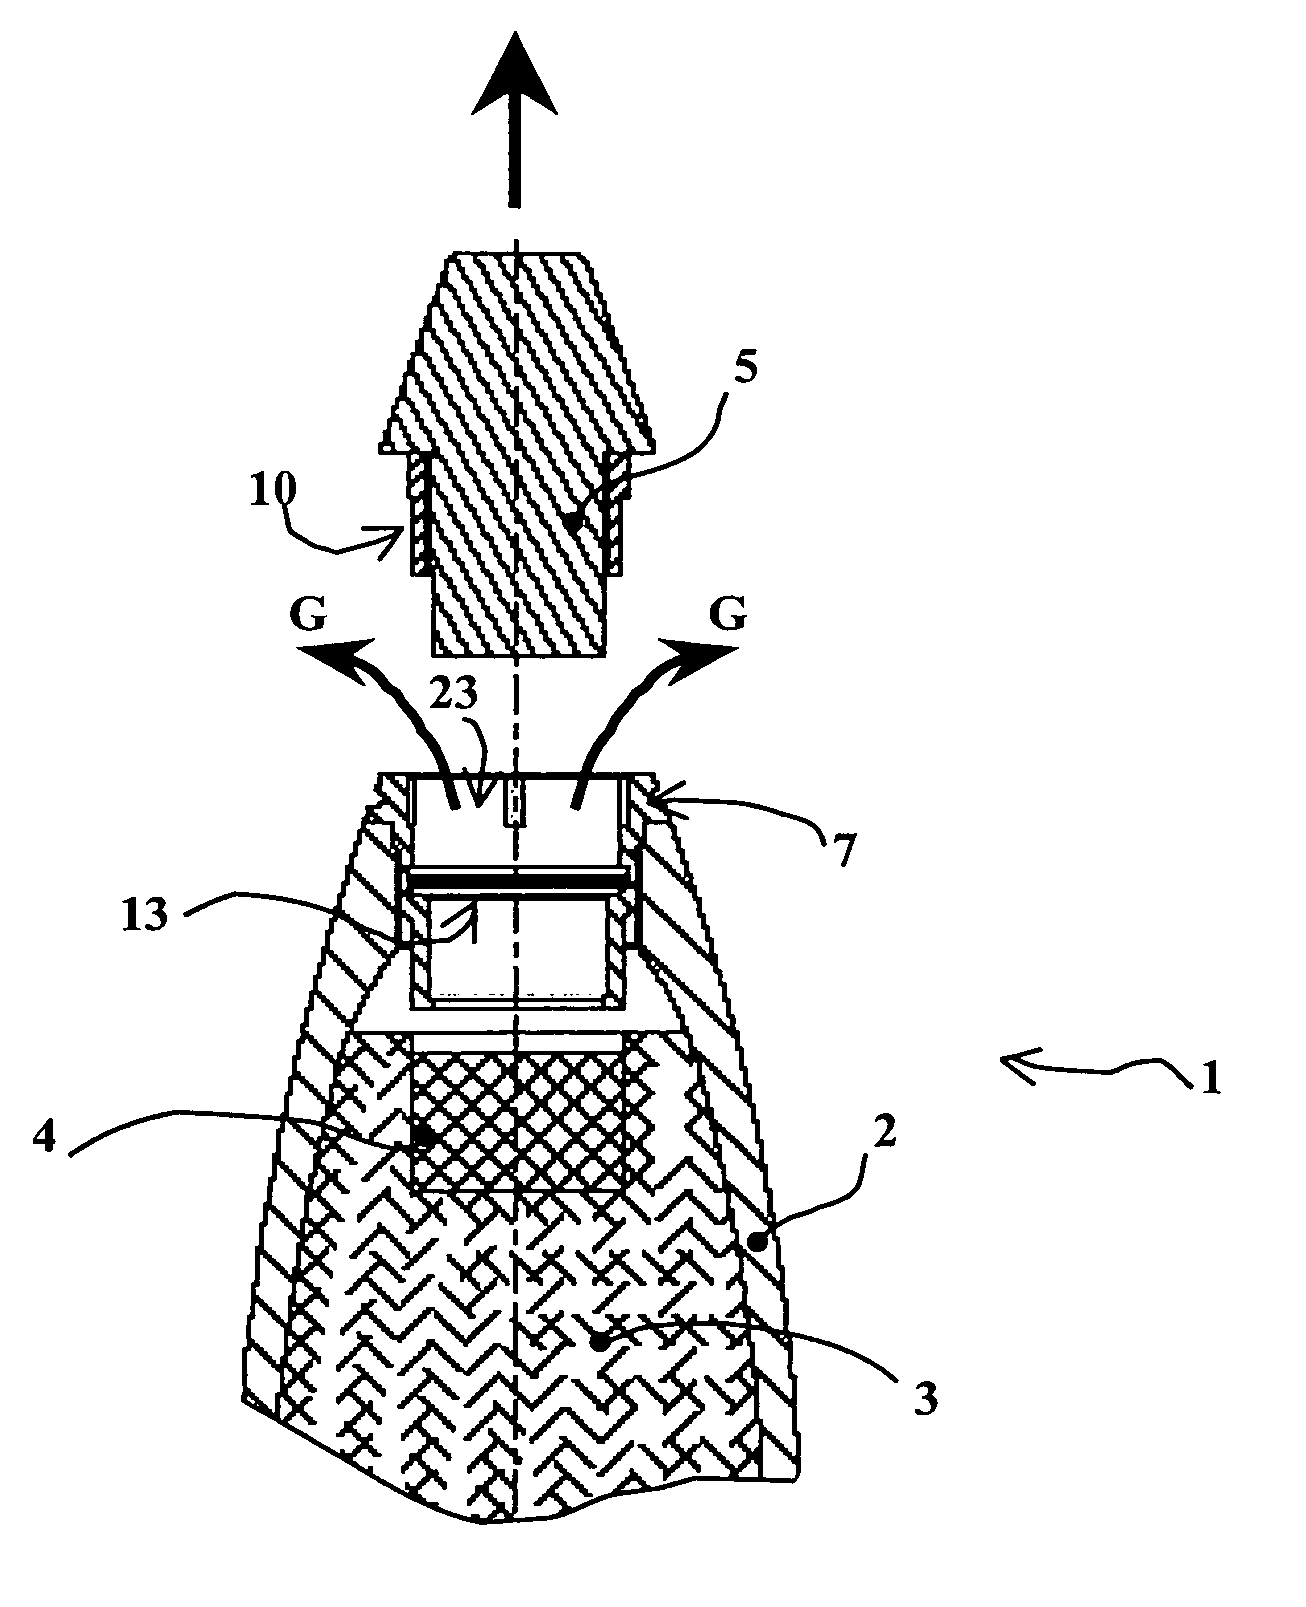 Deconfinement device for the casing of a piece of an ammunition